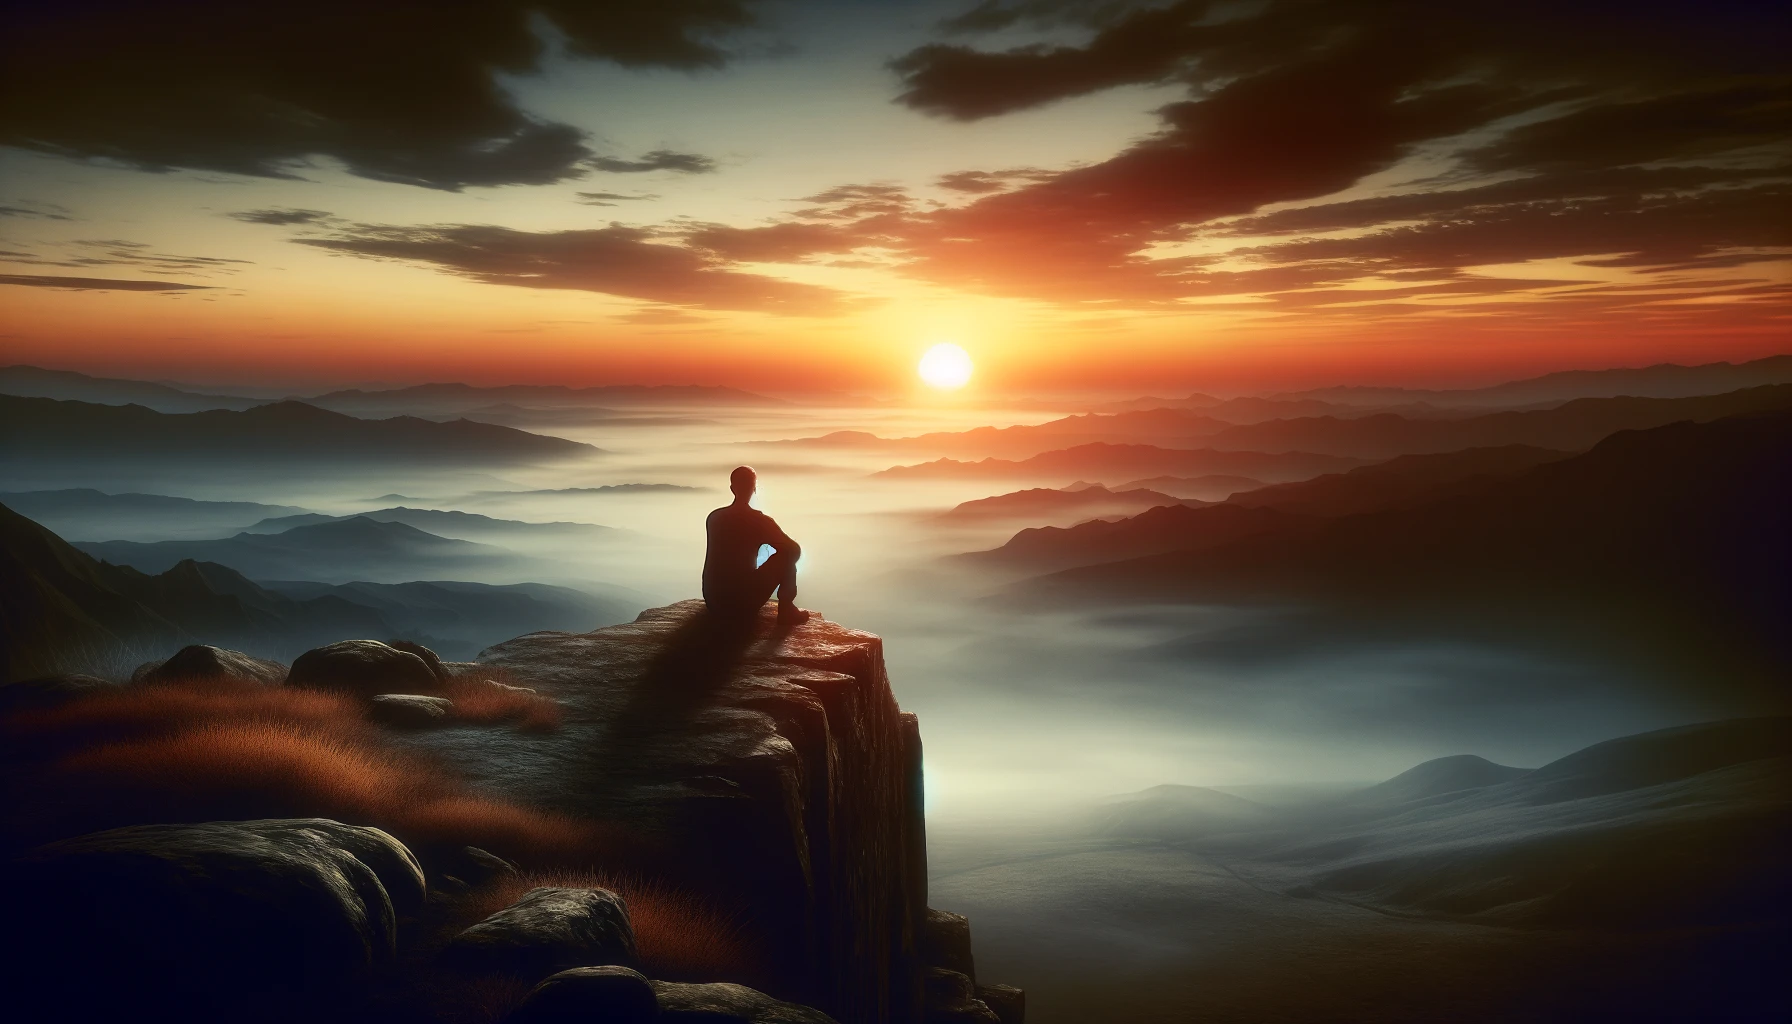 A solitary figure reflects on the edge of a cliff at sunrise, representing the importance of contemplation in distinguishing between a job and a career. The serene landscape and color scheme emphasize reflection and the broader view of one's professional life.